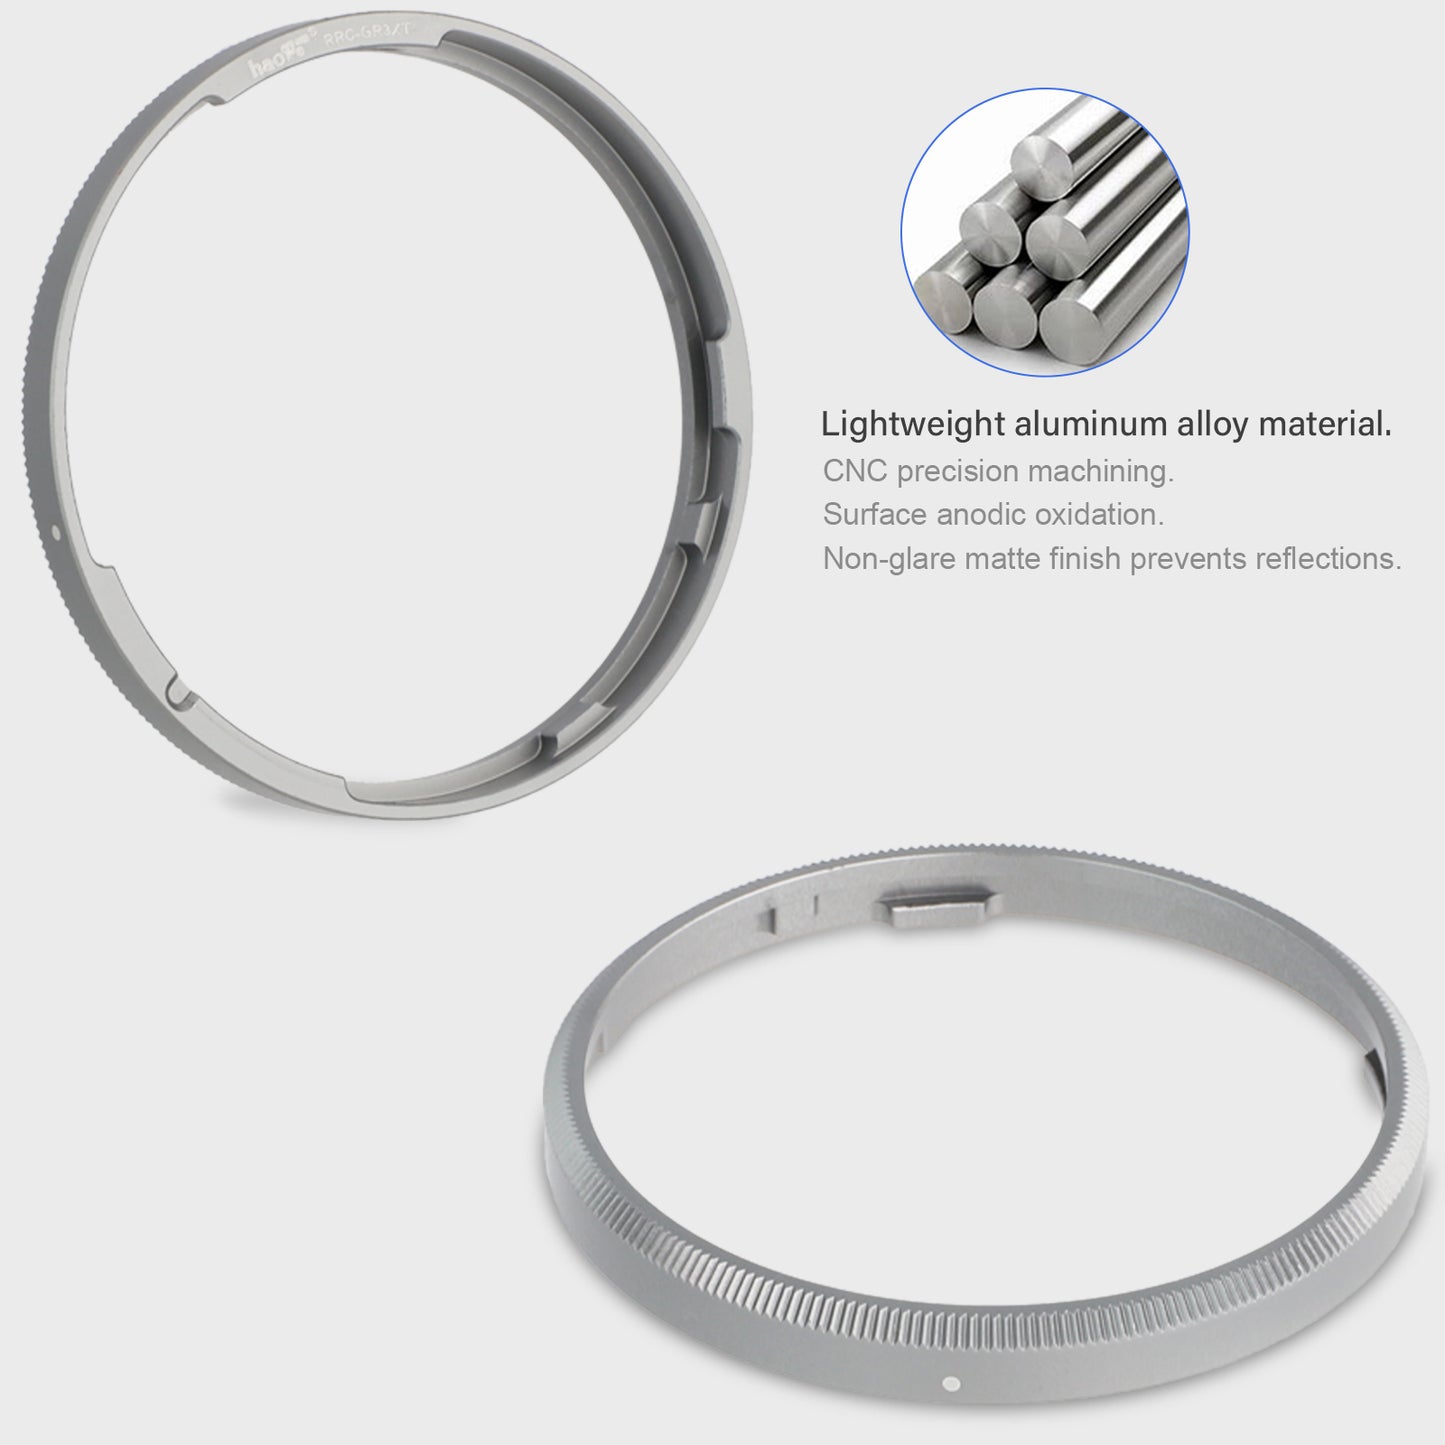 Haoge RRC-GR3XT Silver Grey Metal Decorate Ring for RICOH GR3X/GRIIIX Camera accessories replaces GN-2